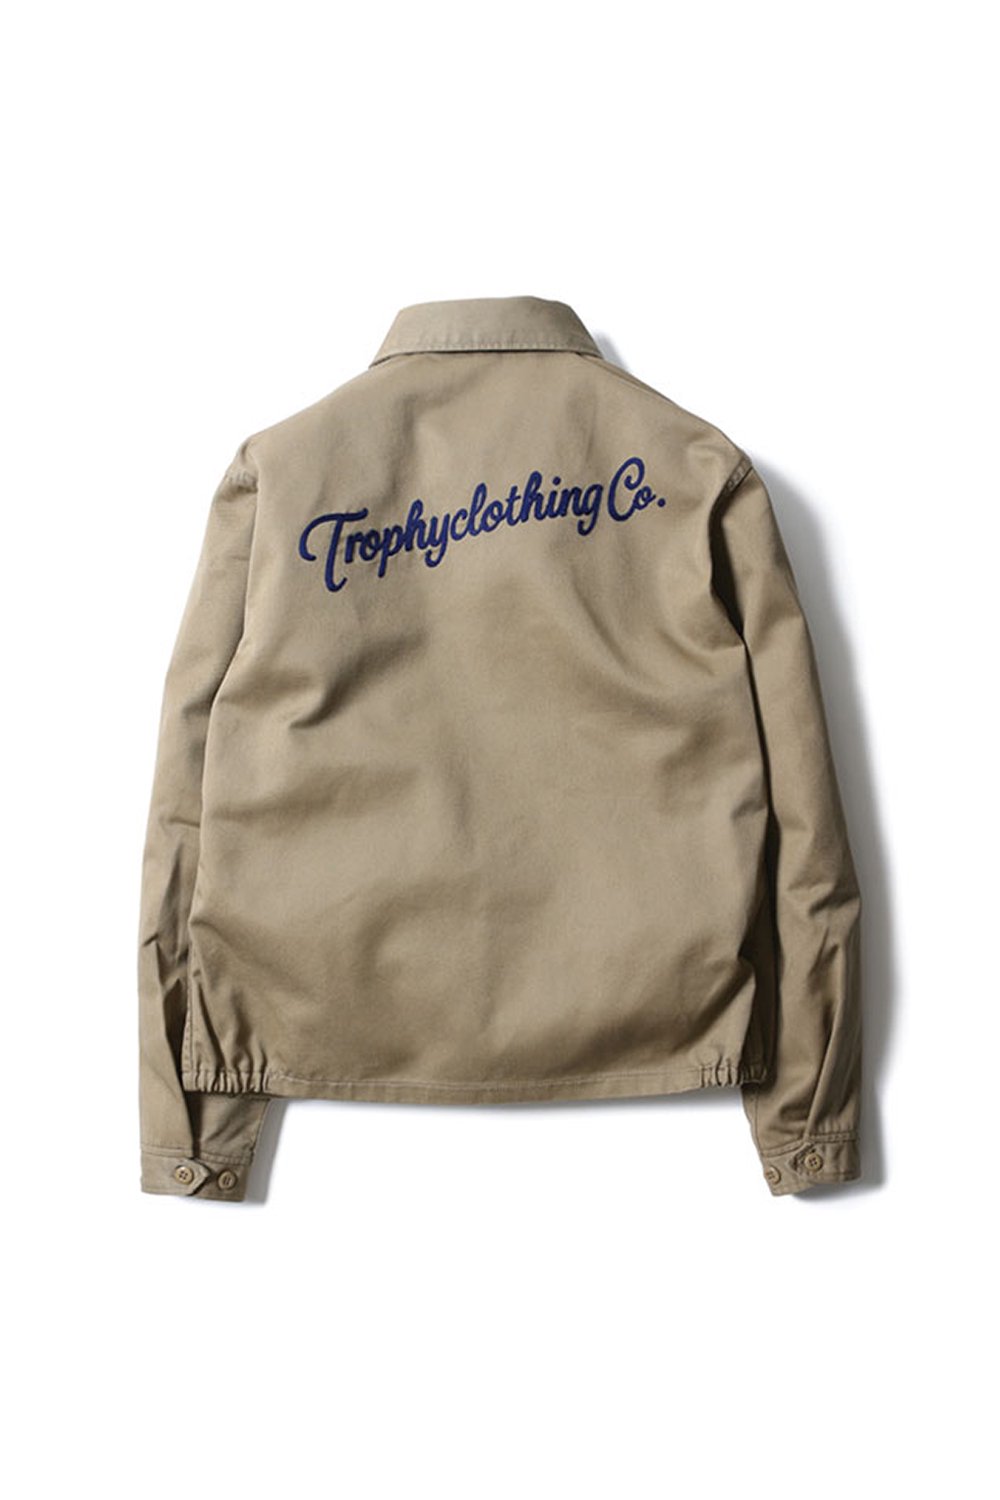 TROPHY CLOTHING(トロフィークロージング) ワークジャケット GAS 